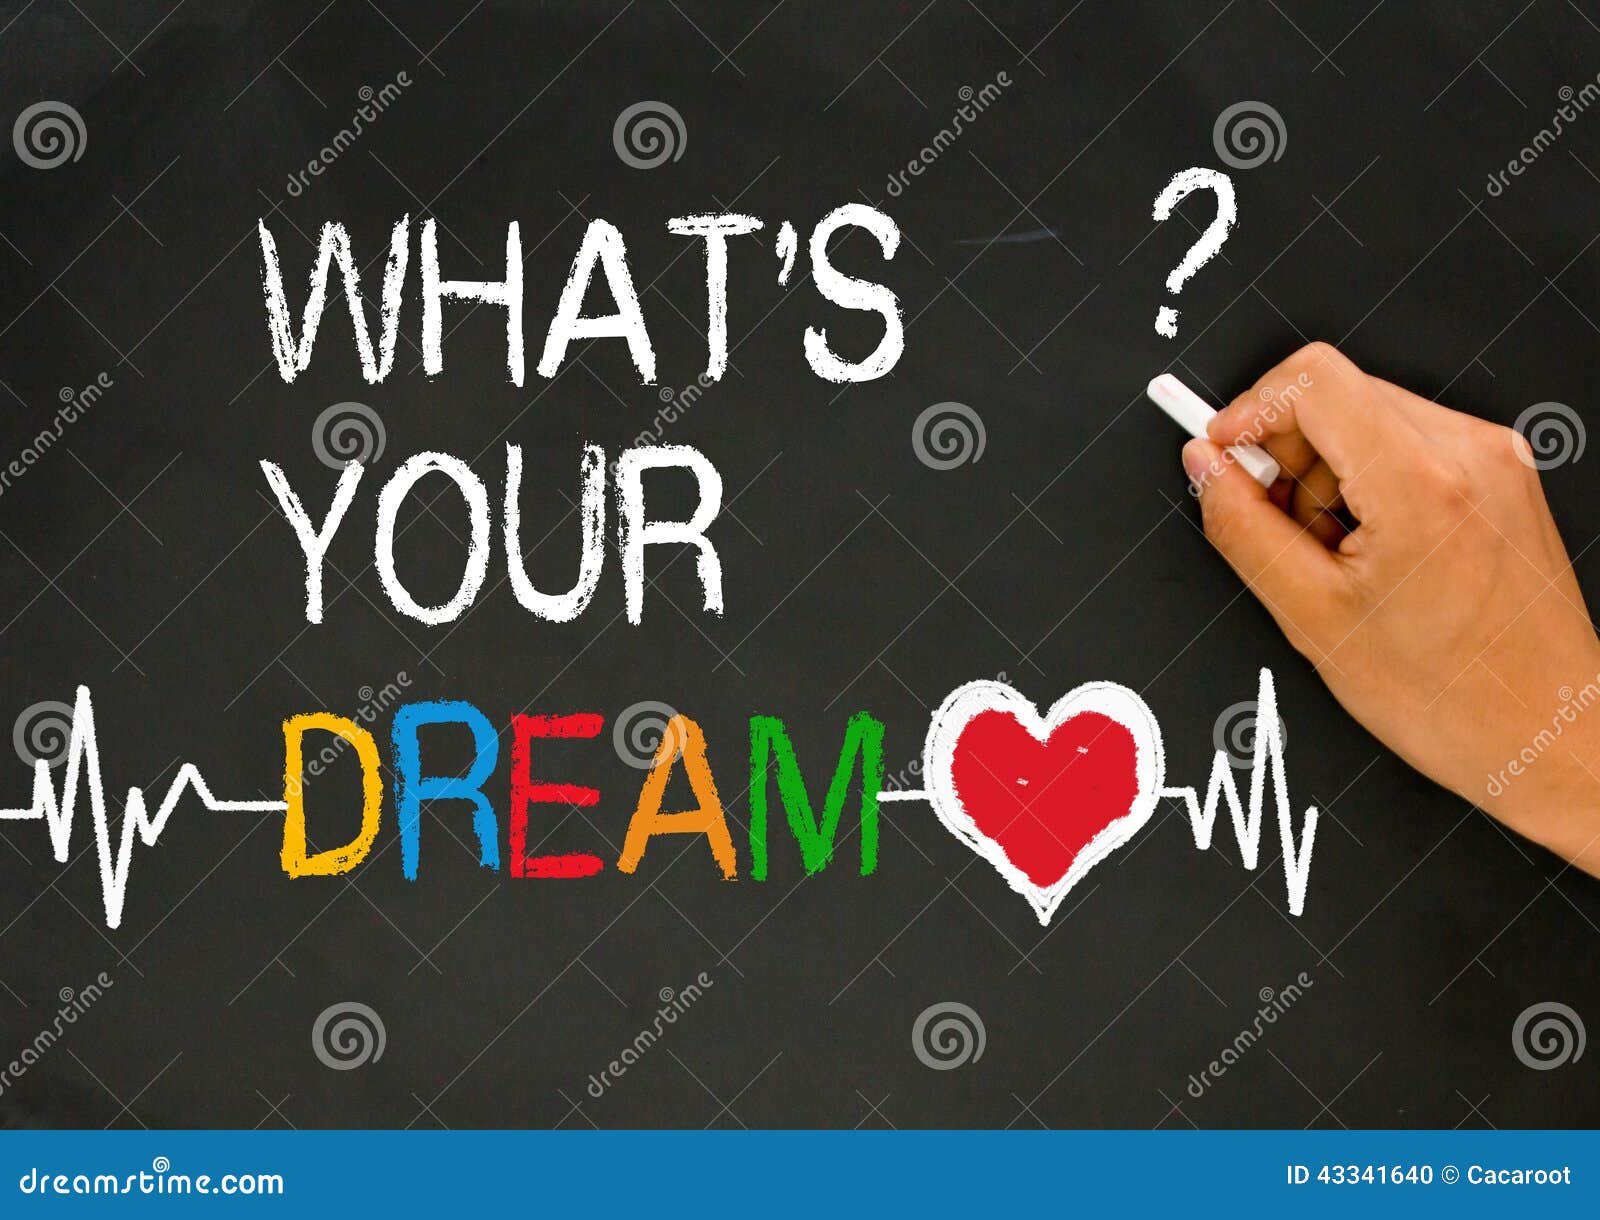 what is your dream